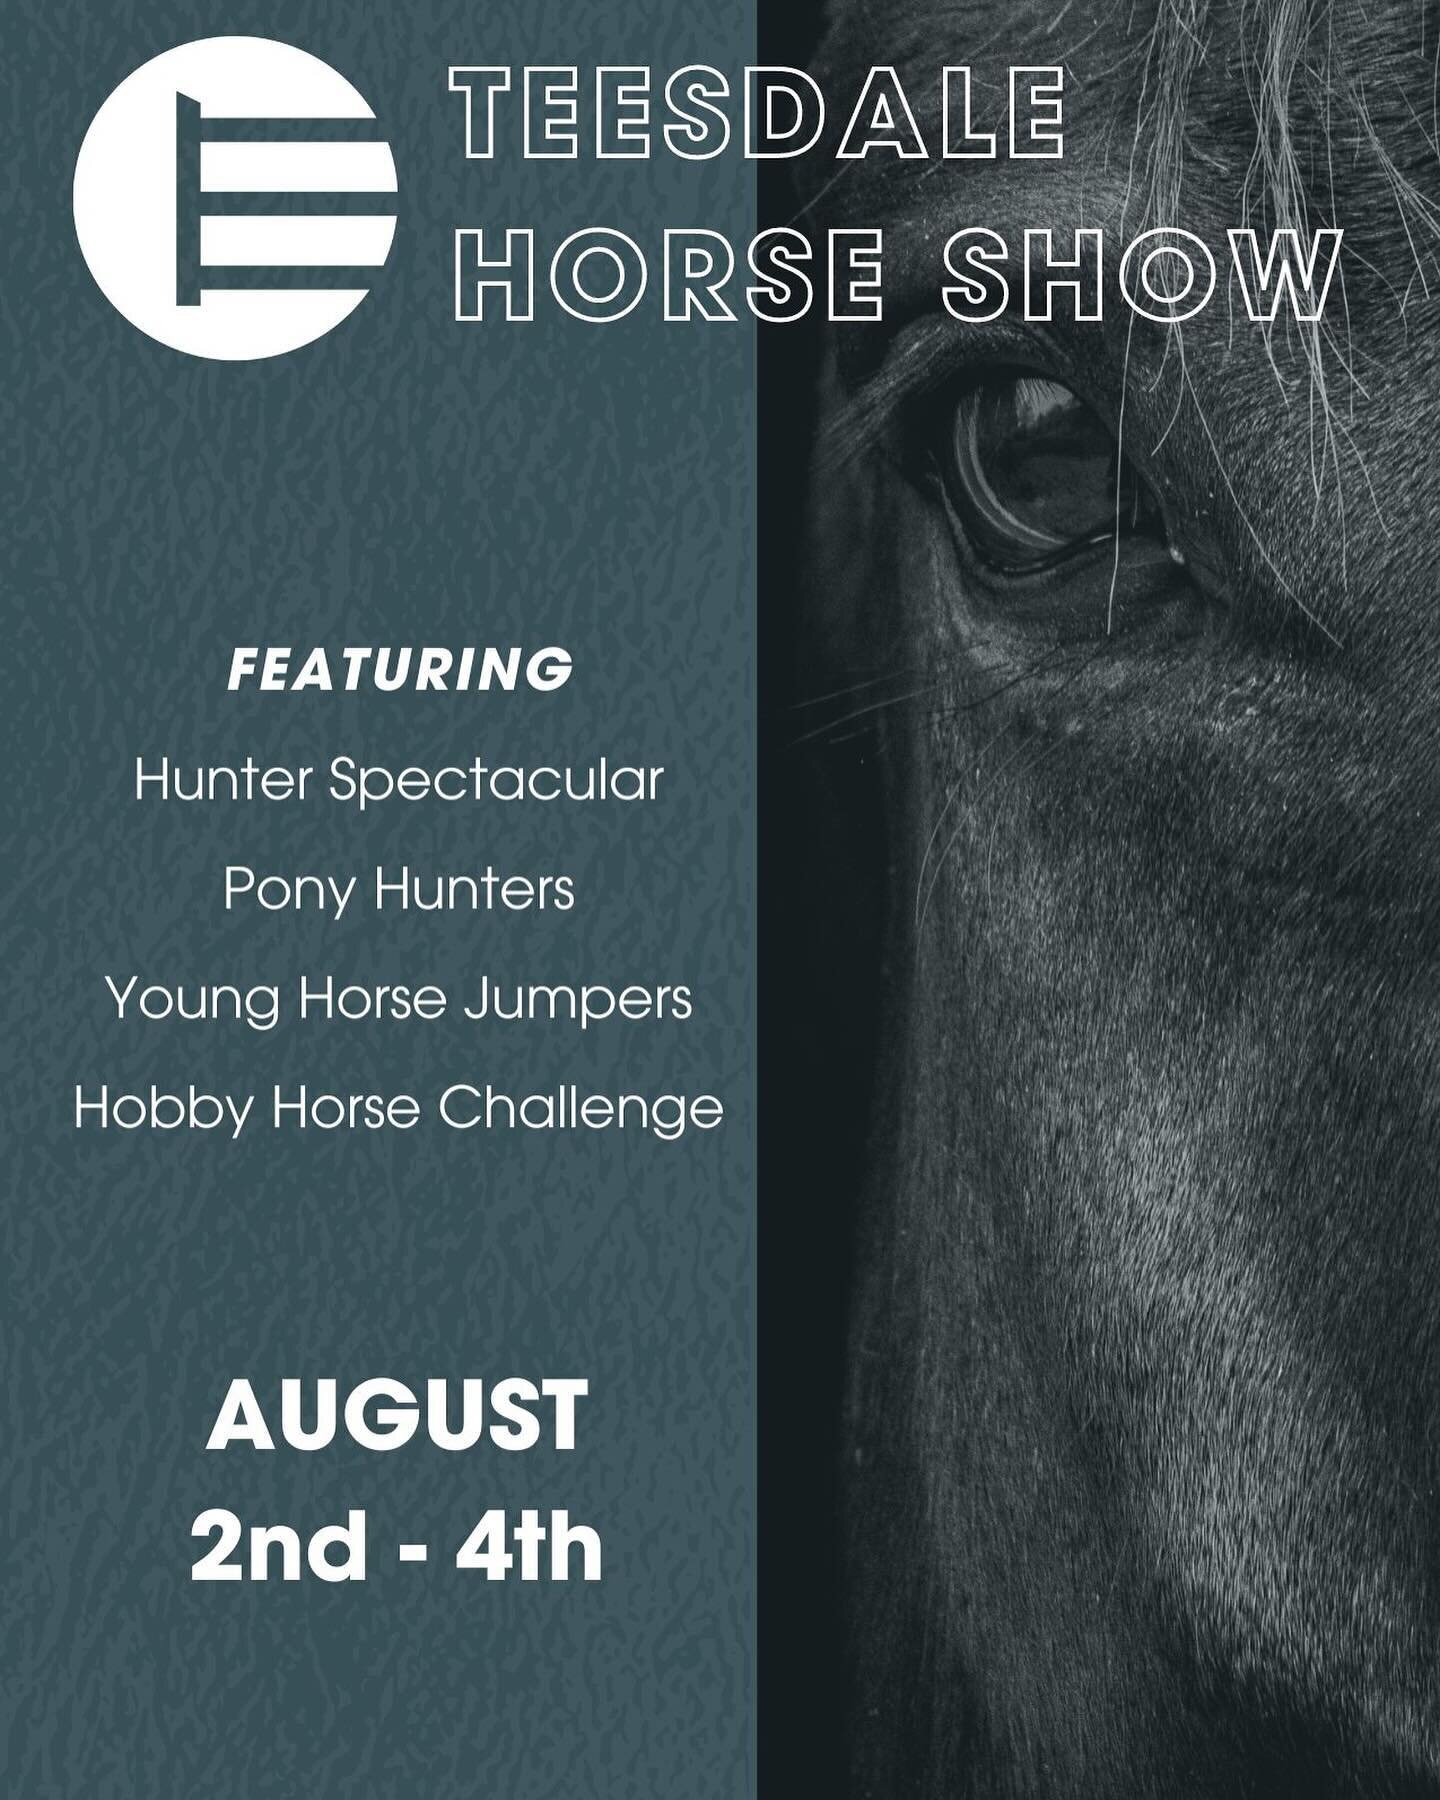 ❗️Save the date❗️Teesdale will be running our summer horse show August 2nd - 4th with the return of some fan favourite classes as well as some new ones 👀 
Check out our website for more information and sign up for our newsletter to stay up to date! 